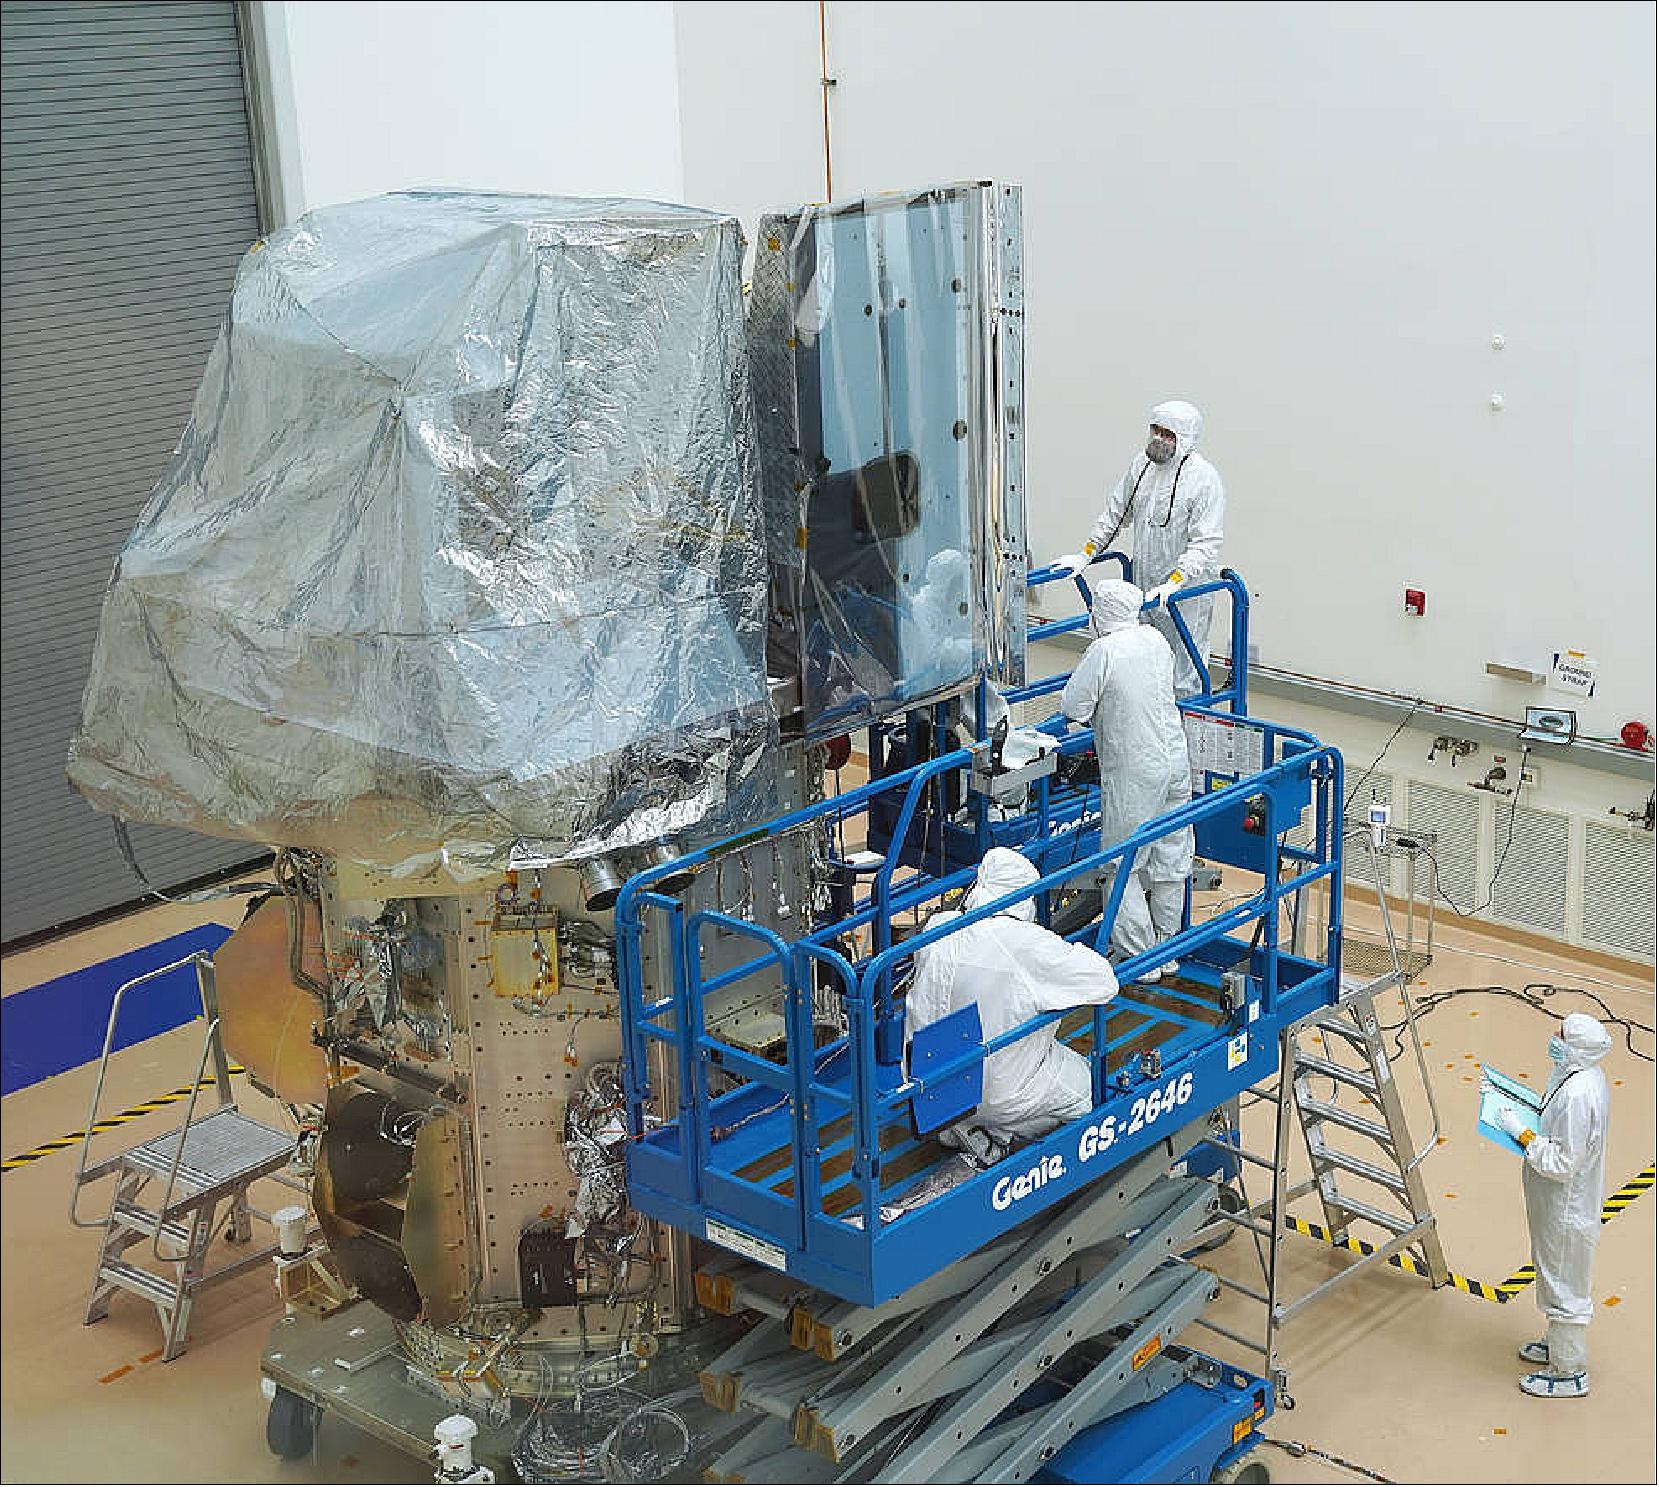 Figure 5: Engineers work on the newly integrated Landsat 9 satellite in a cleanroom at the Northrop Grumman facility in Gilbert, Arizona. In December, the team attached Landsat 9’s two instruments: OLI-2 (left) and TIRS-2 (right) to the spacecraft bus at the bottom of the image. The two instruments are covered to protect them from contaminants ( image credit: Northrop Grumman)